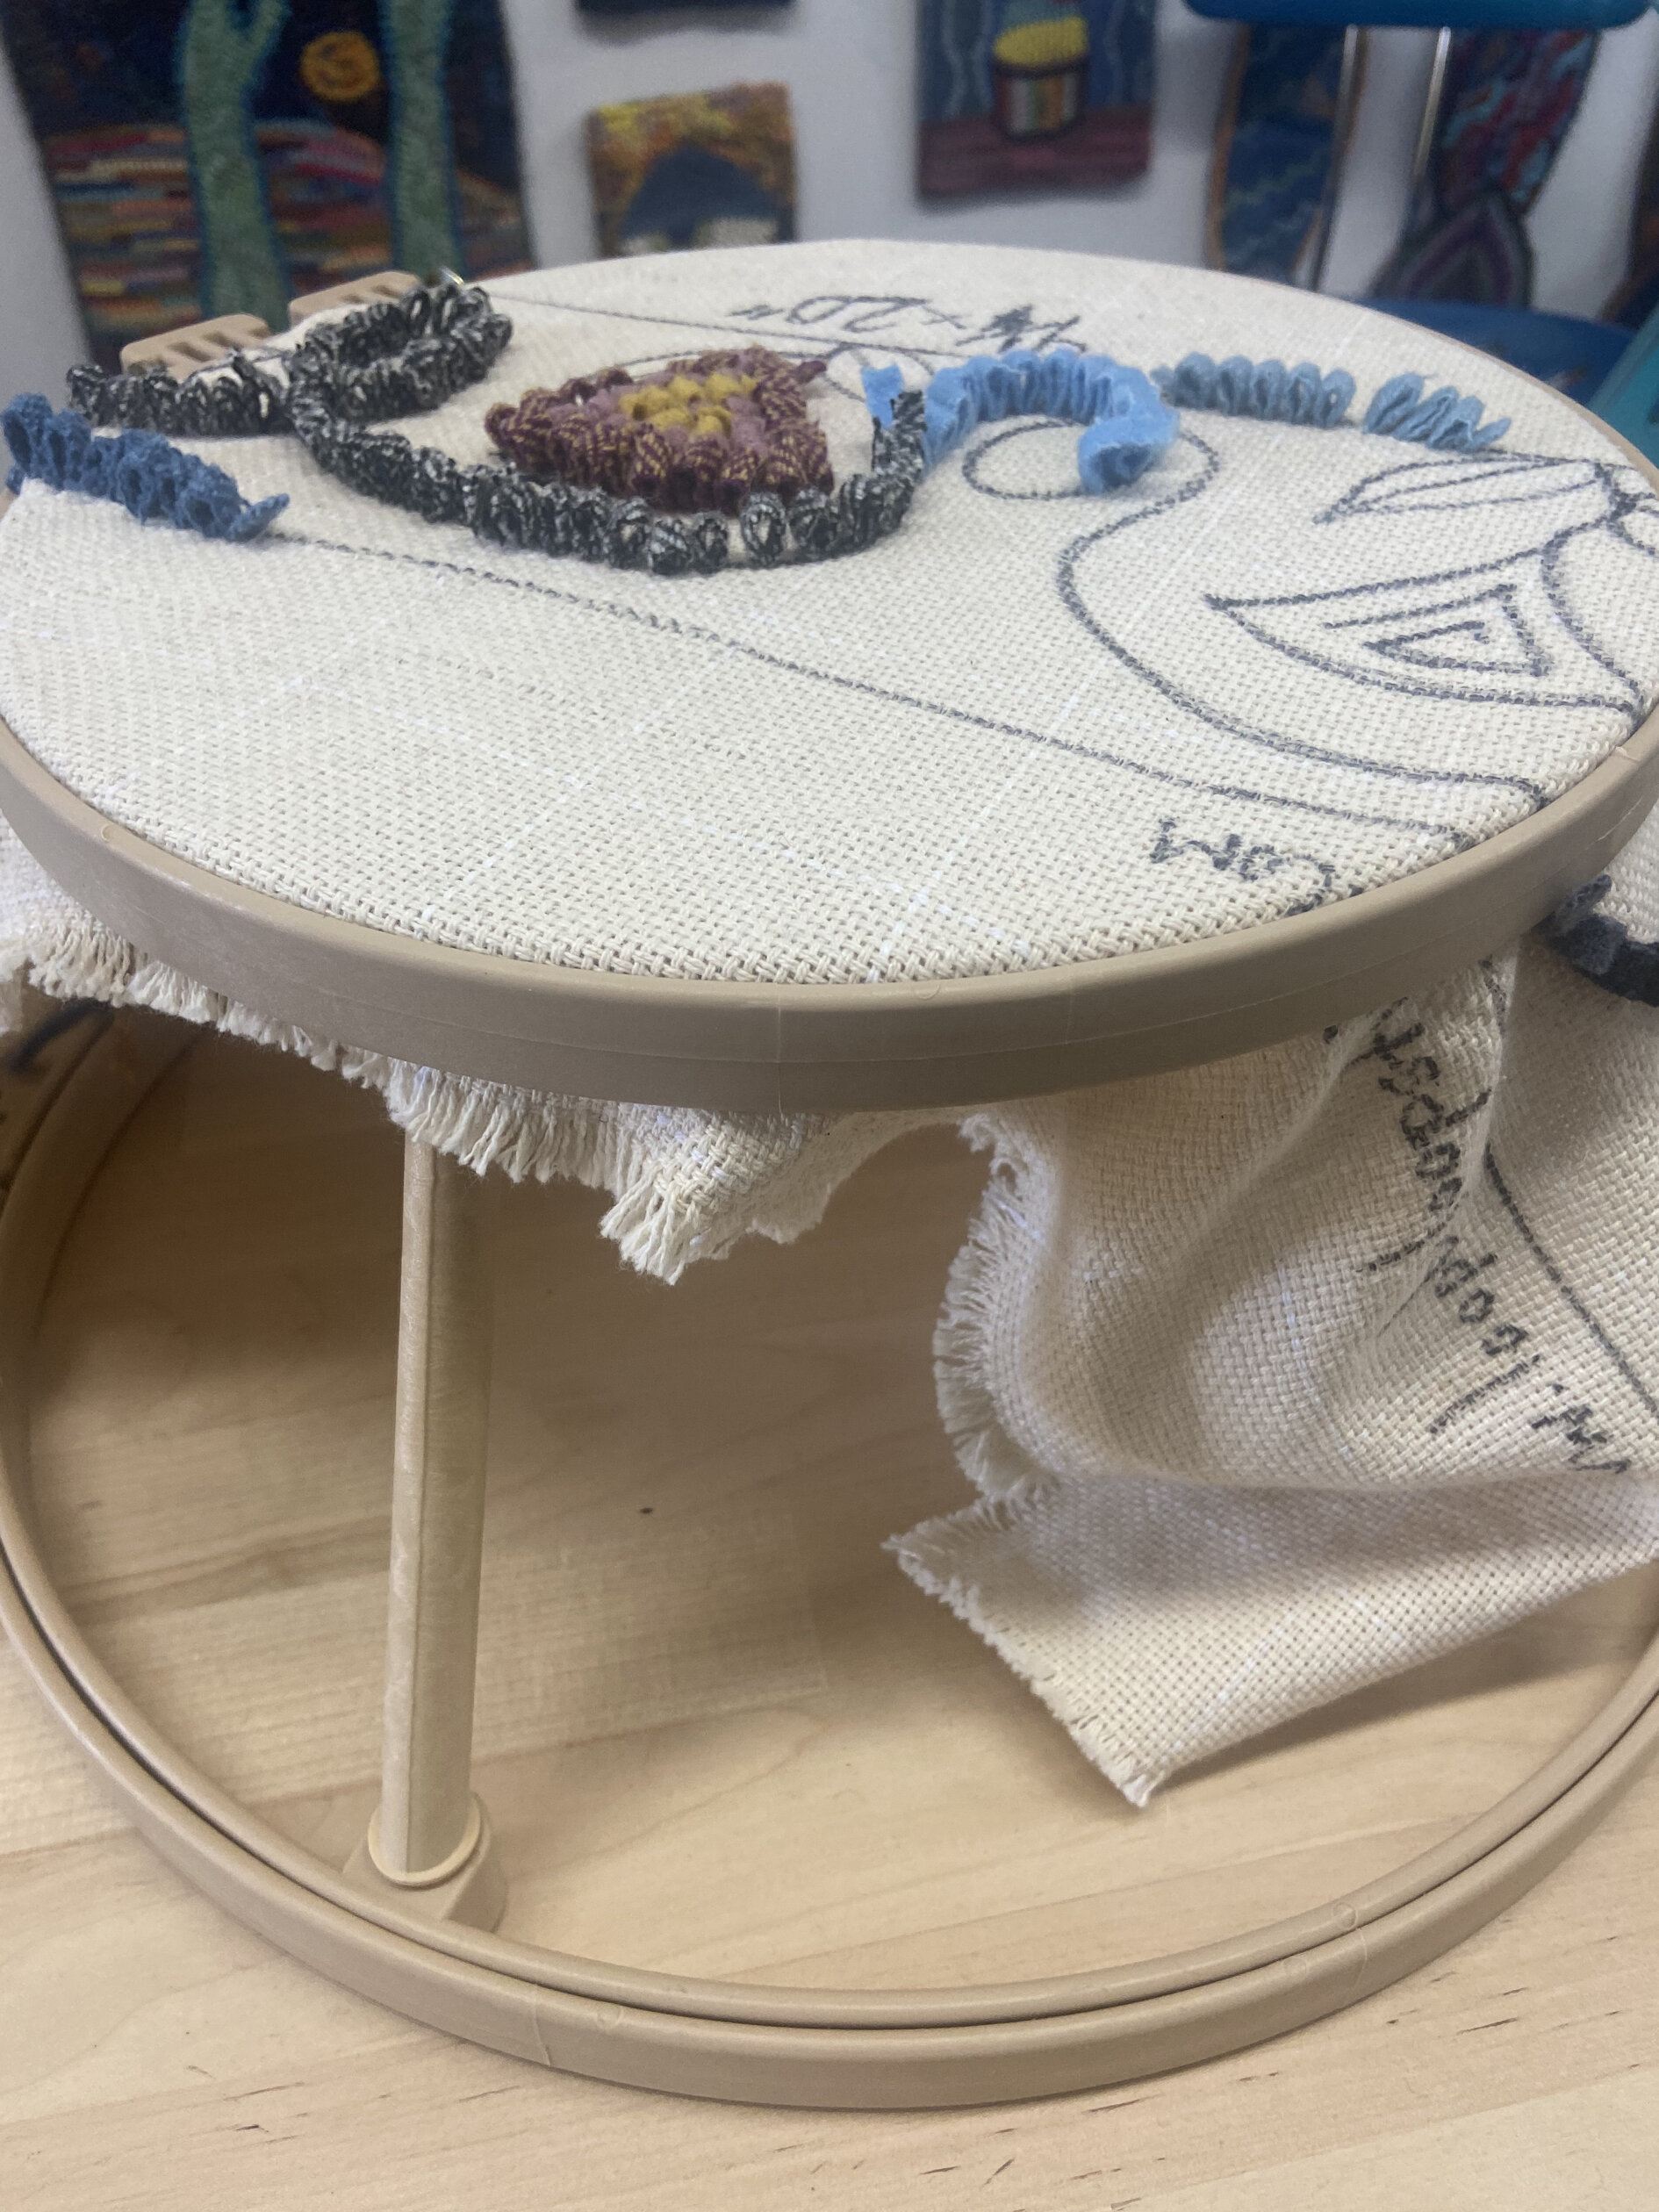 Trying out my new quilting hoop and stand for the first time - any tips for  making hand quilting work on a hoop? : r/quilting